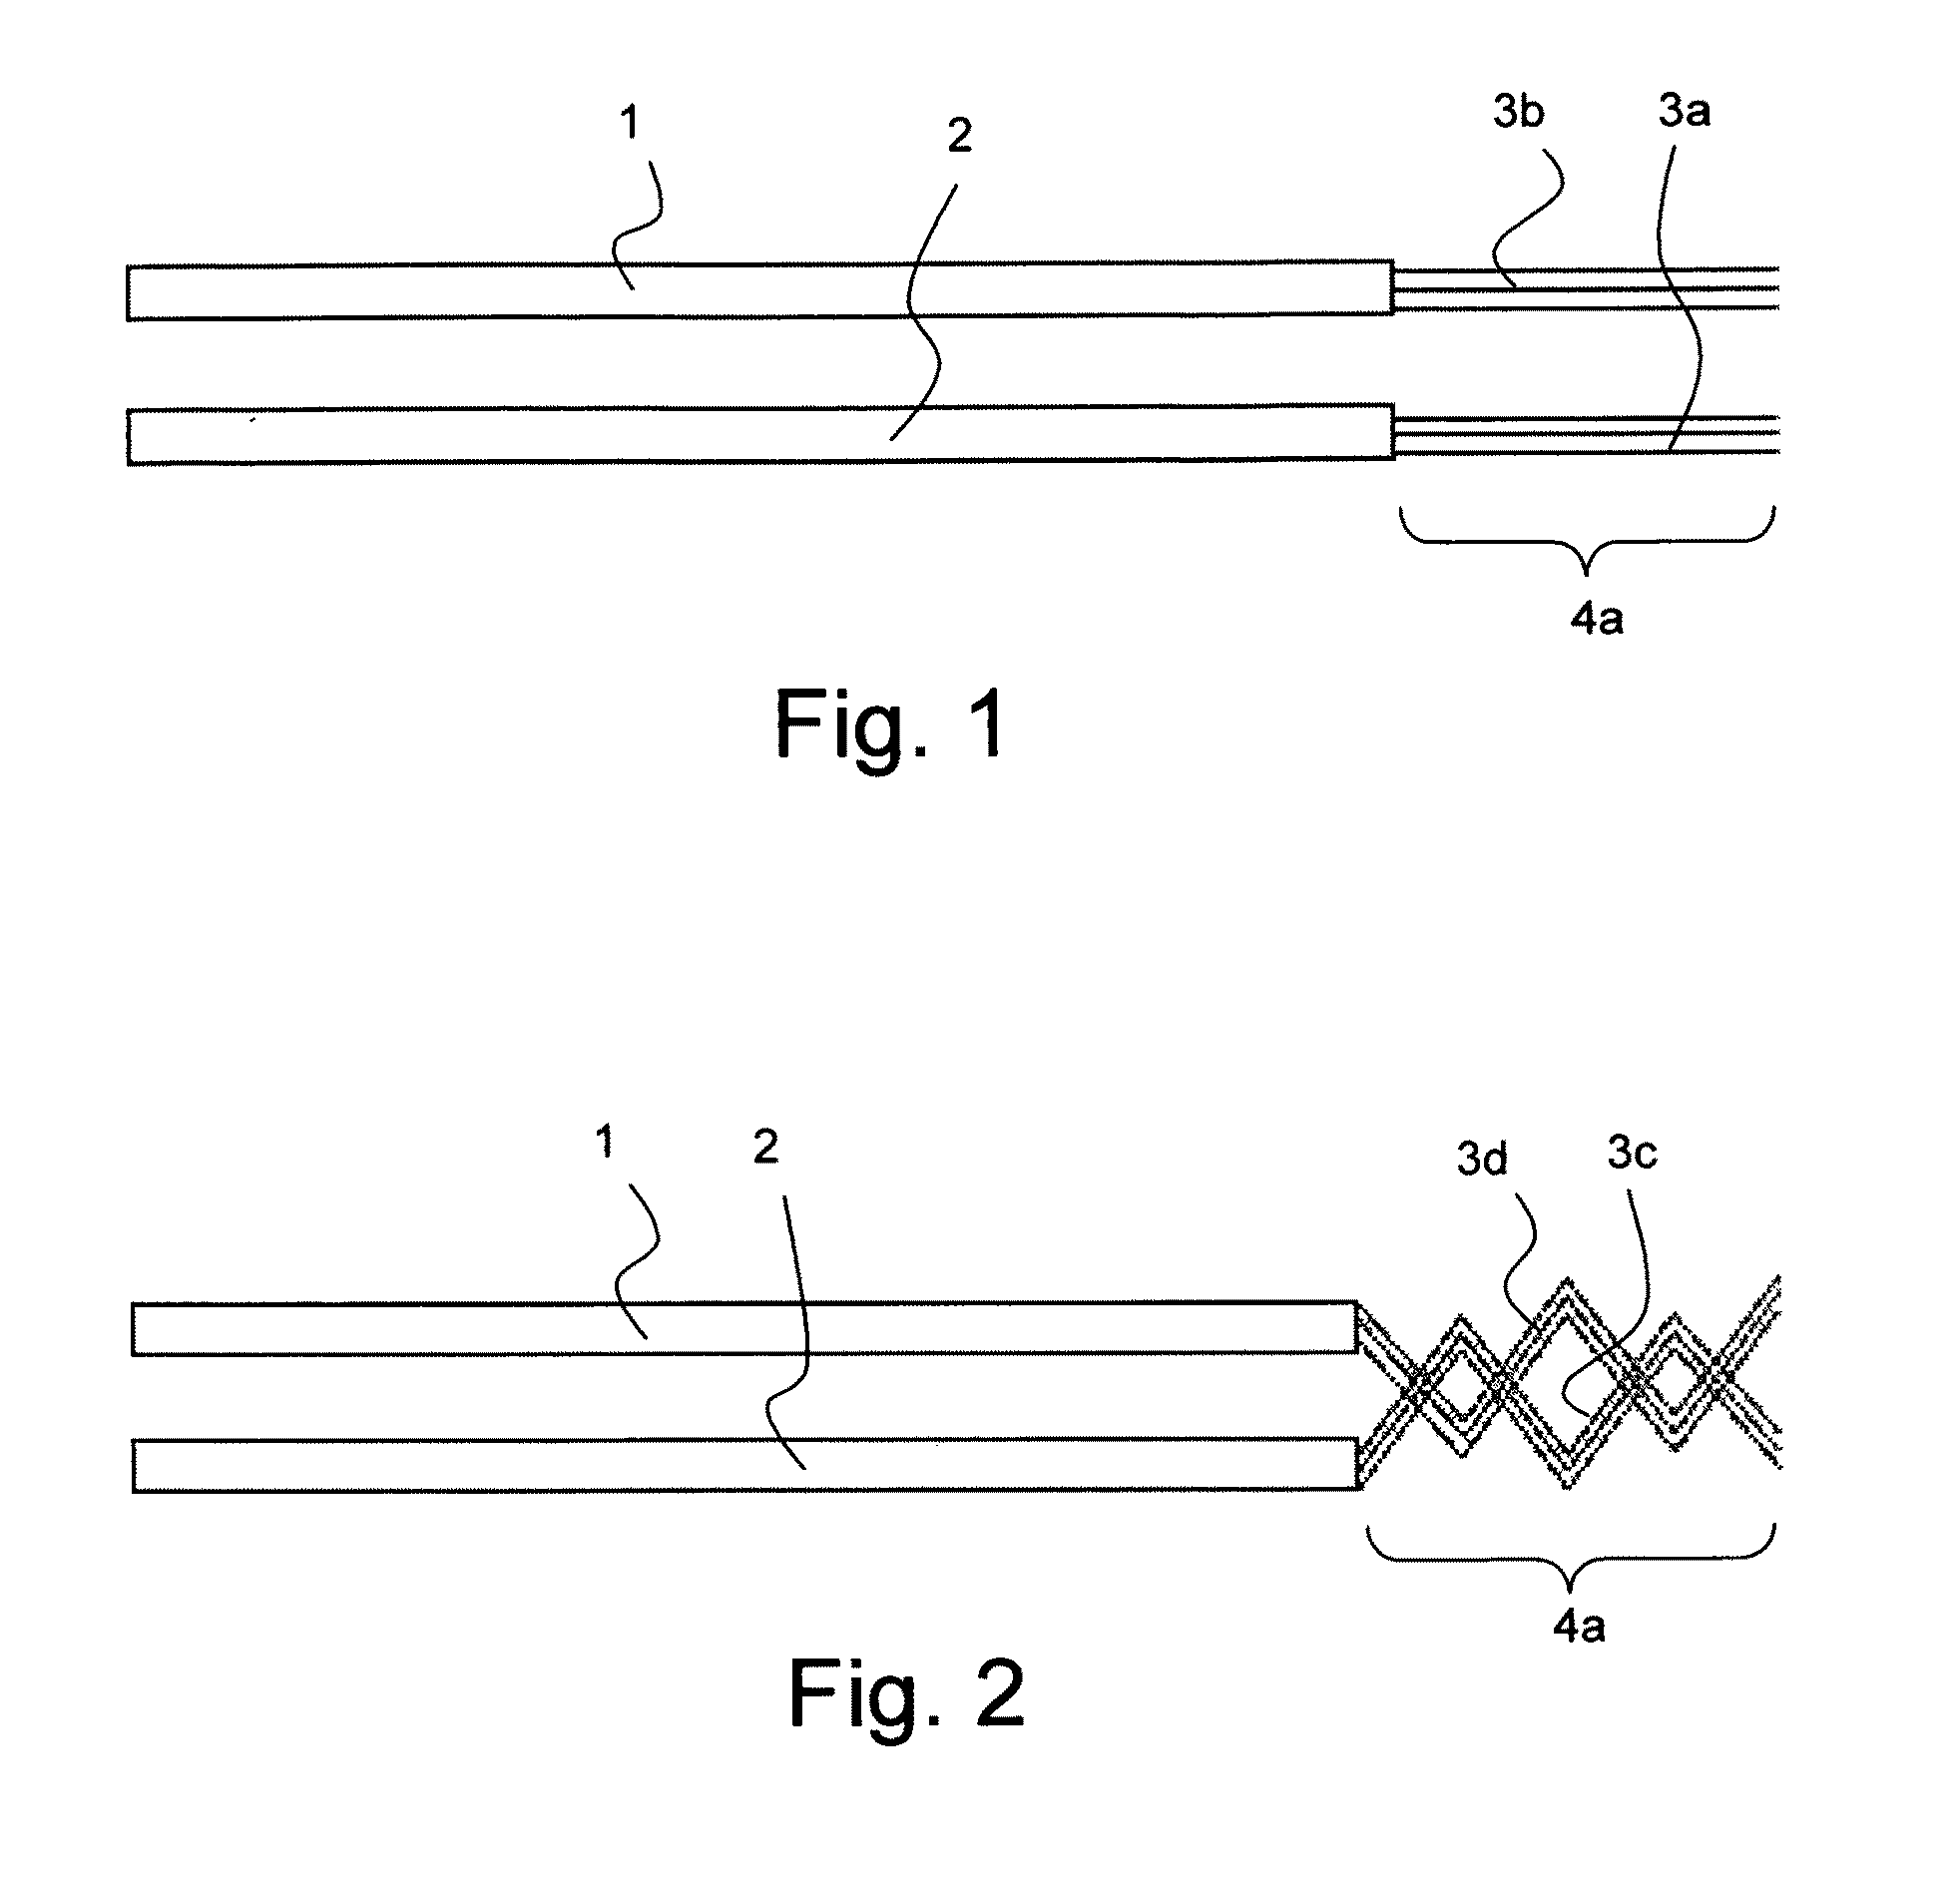 Method for superconducting connection between MgB2 superconducting wires via a MgB2 matrix made from a boron powder compressed element infiltrated with Mg